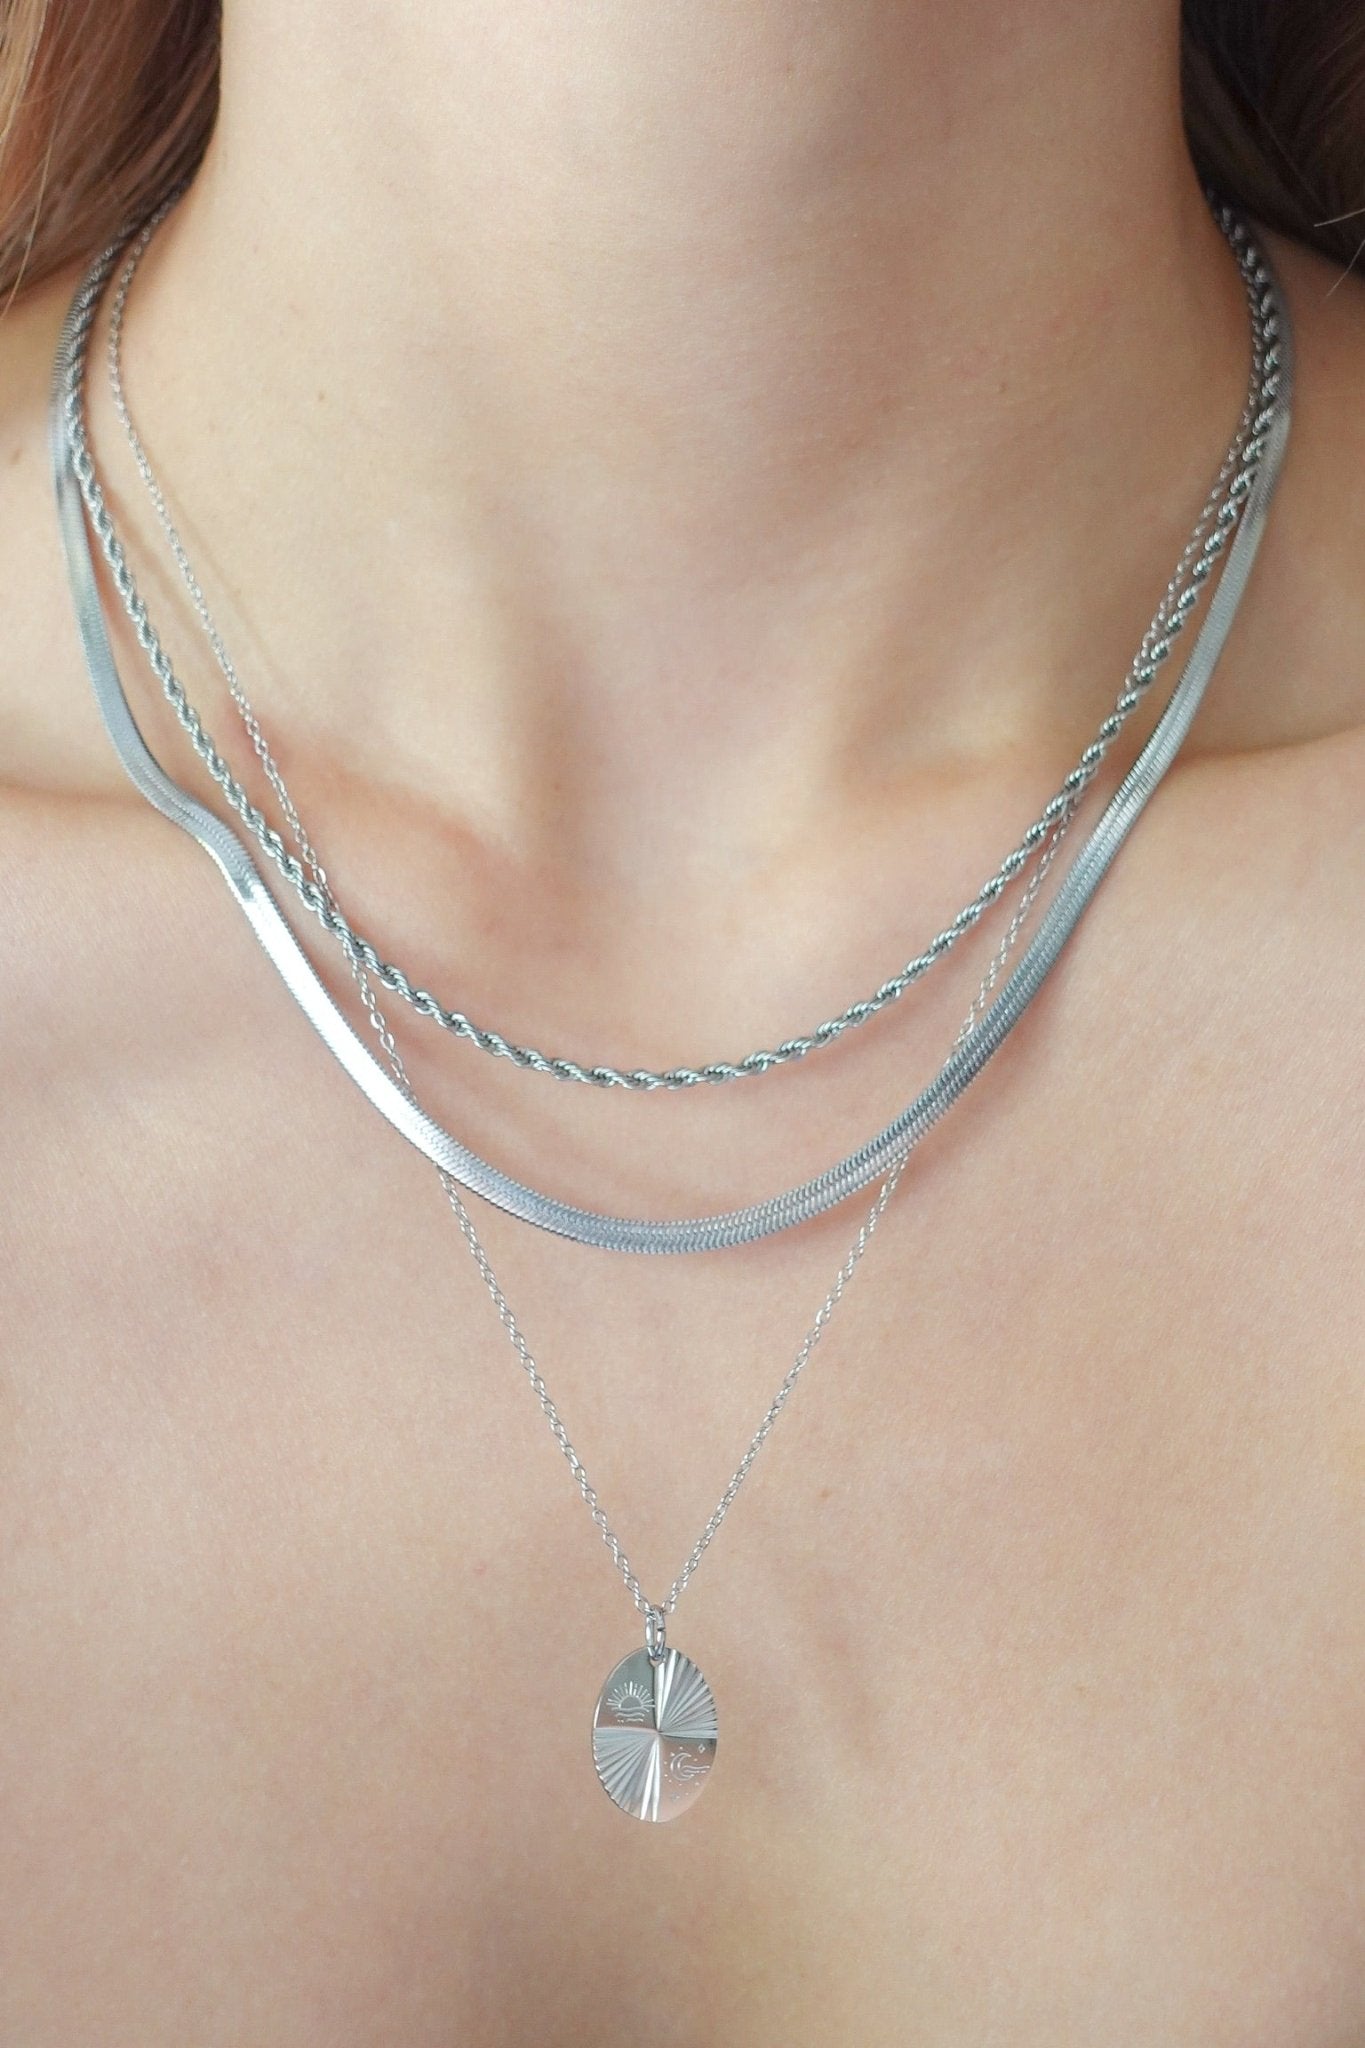 Gwendolyn Silver Herringbone Chain Necklace - Flaire & Co.